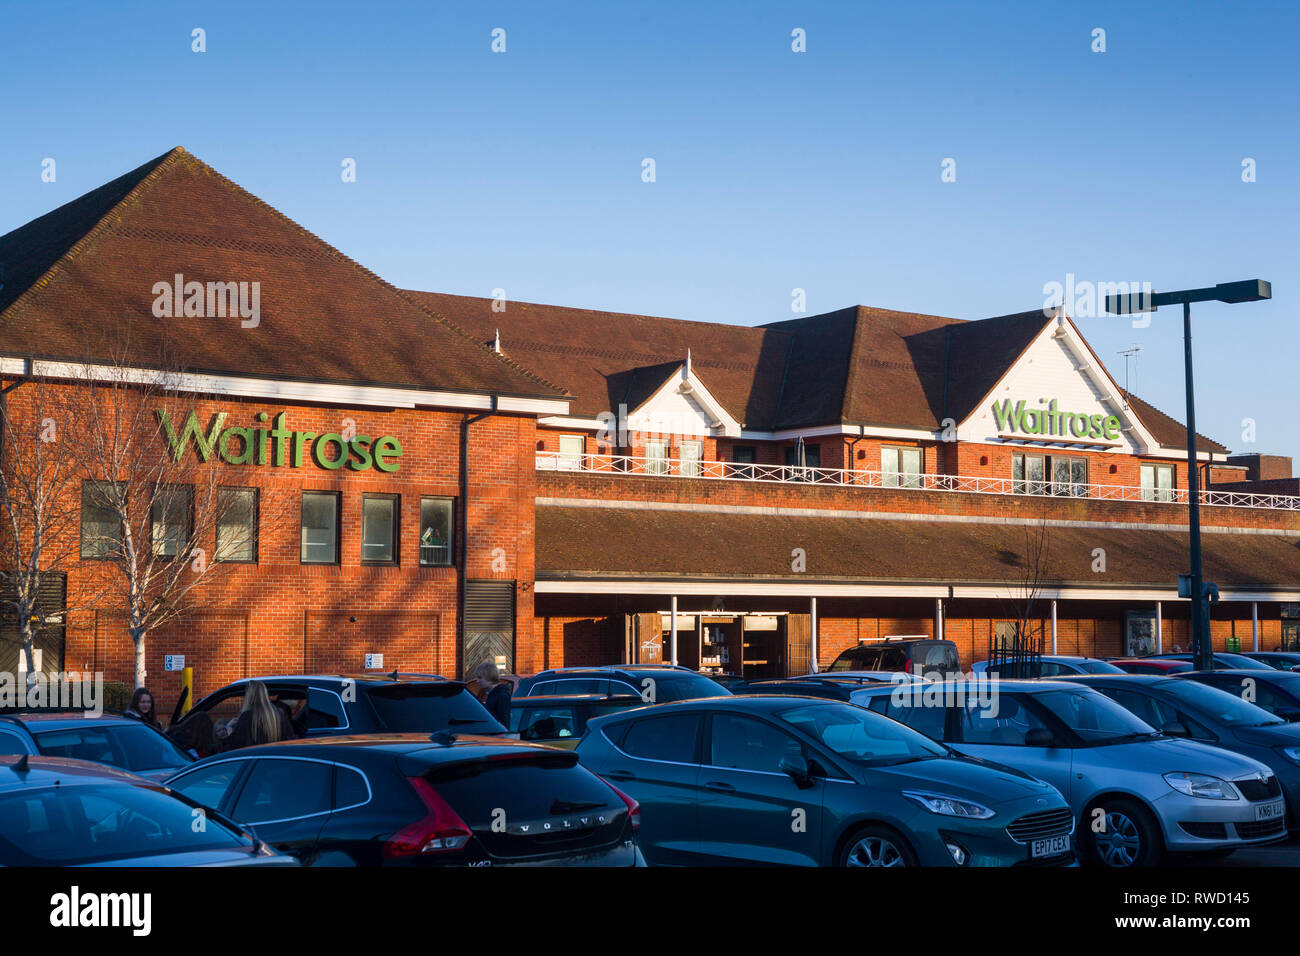 The Waitrose supermarket with parked cars in Henley-on-Thames, Oxfordshire. Stock Photo